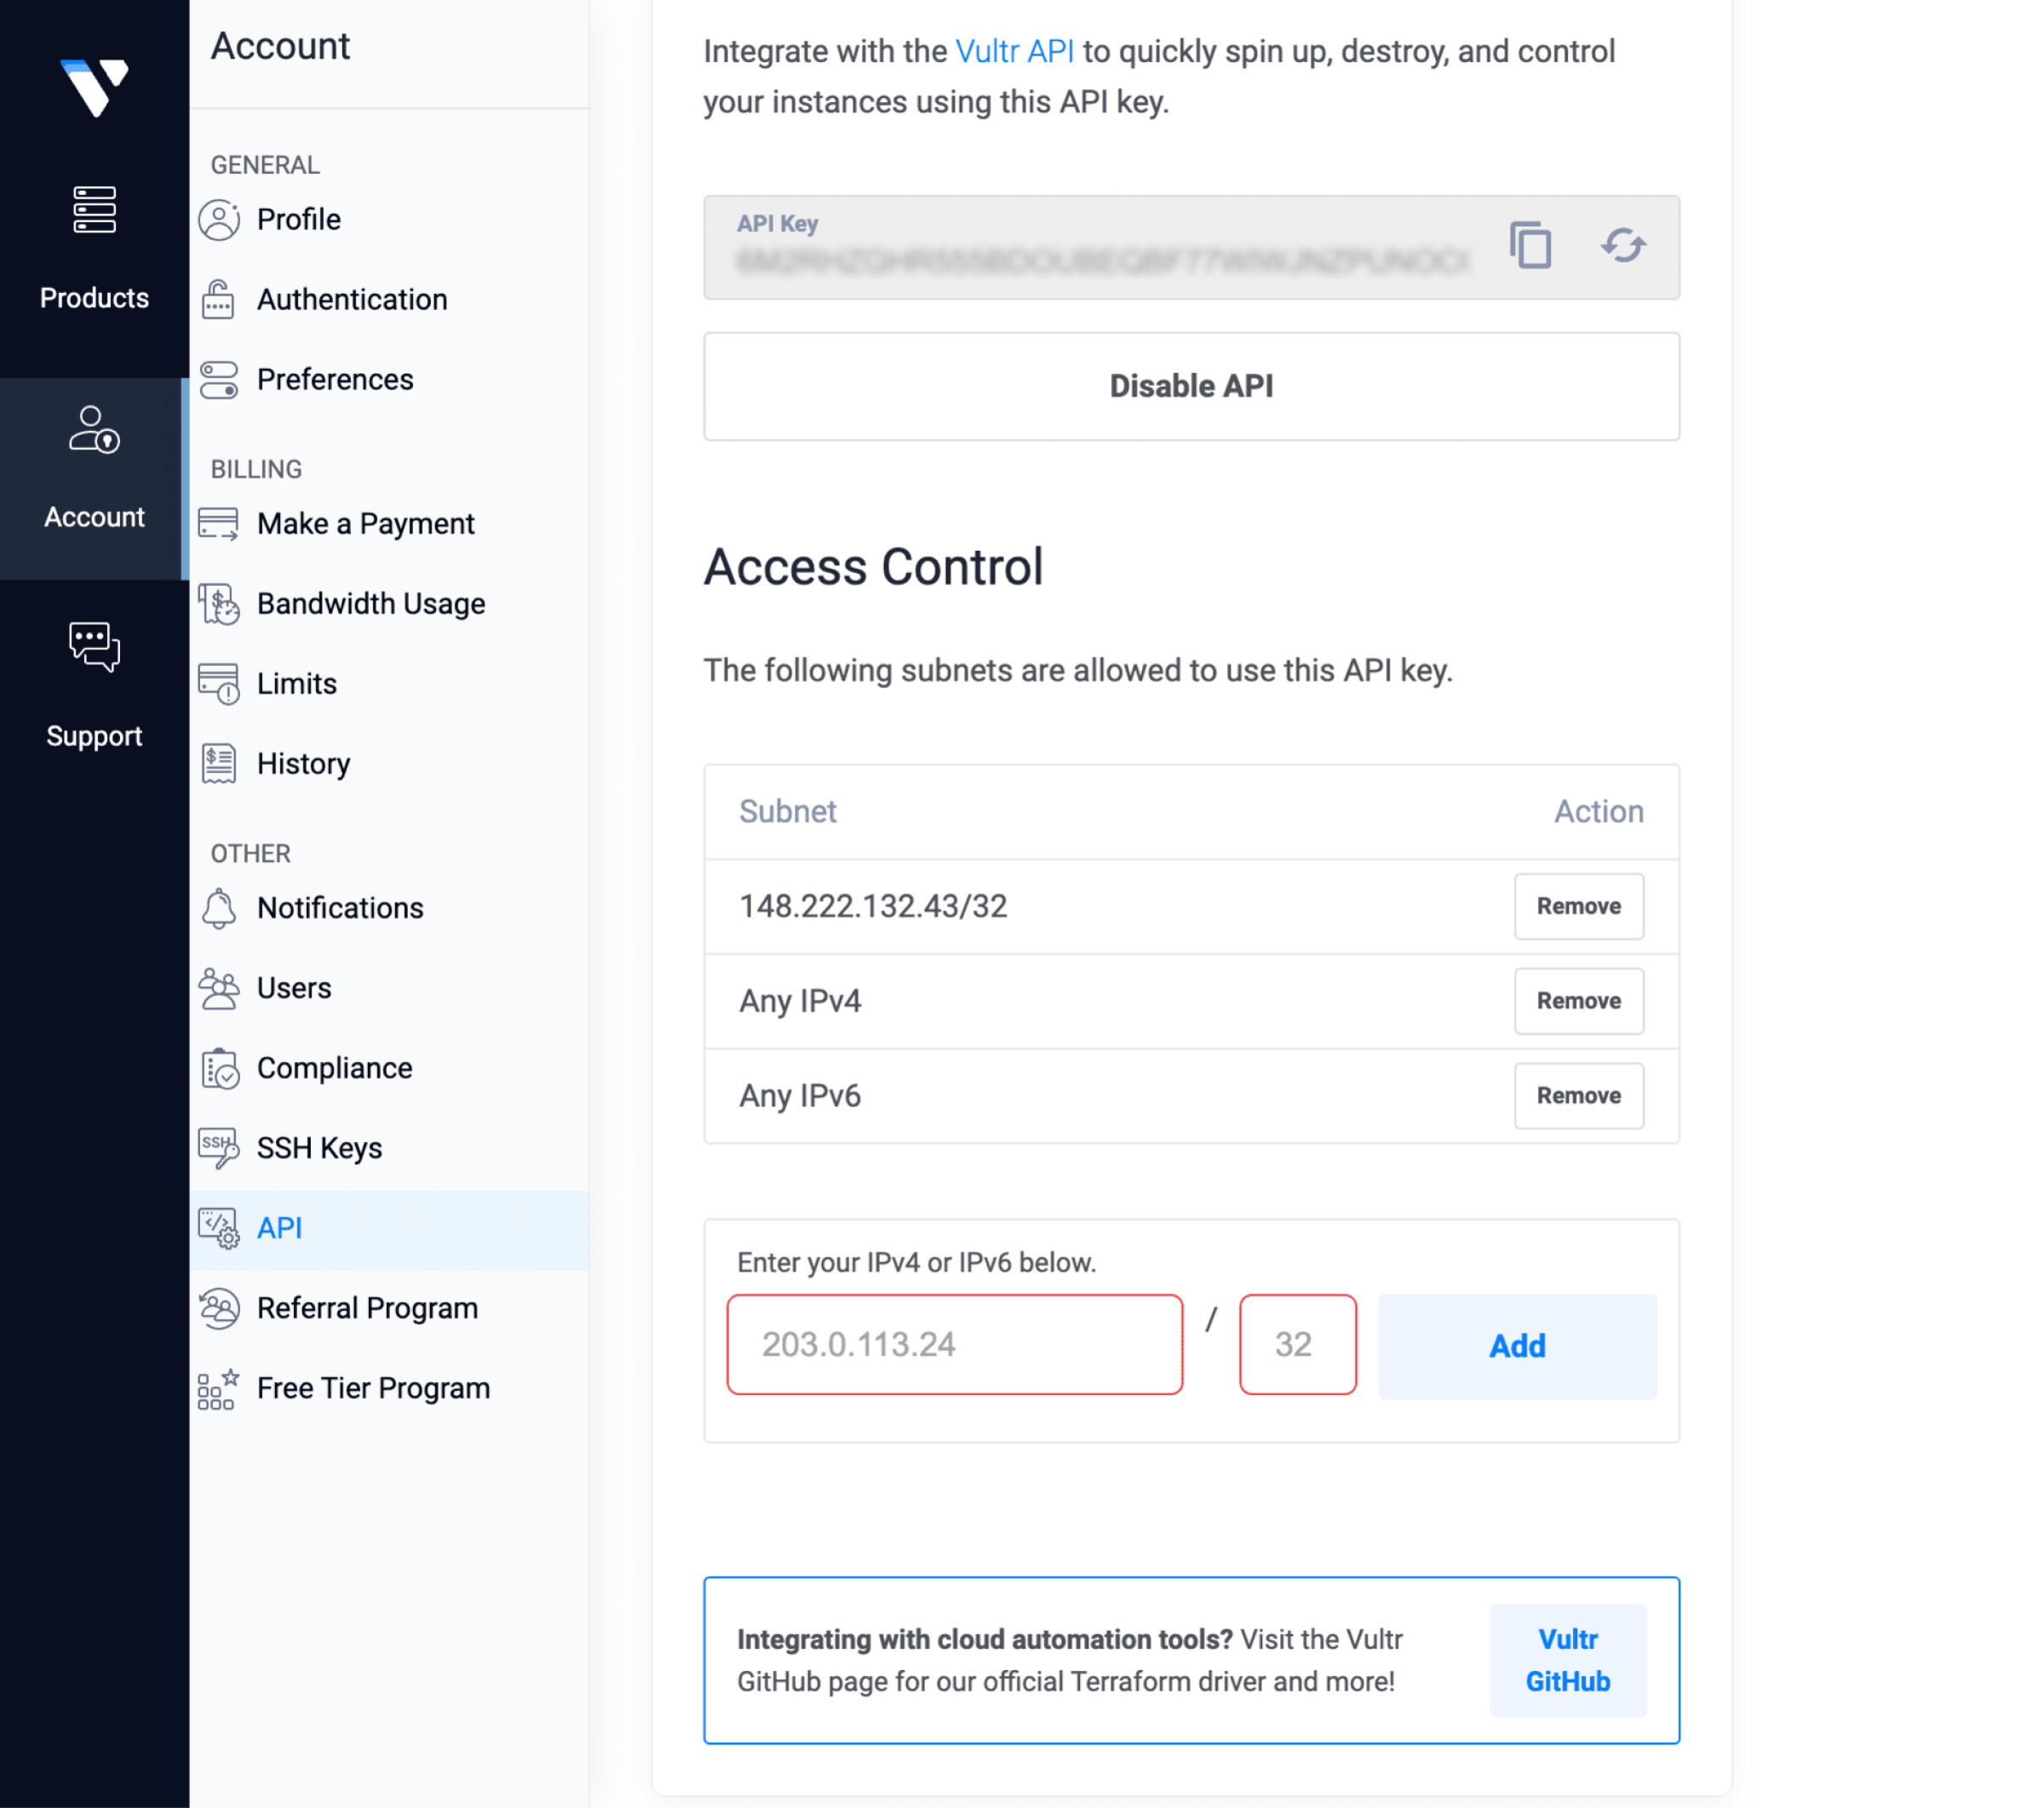 The Vultr Access Controls section